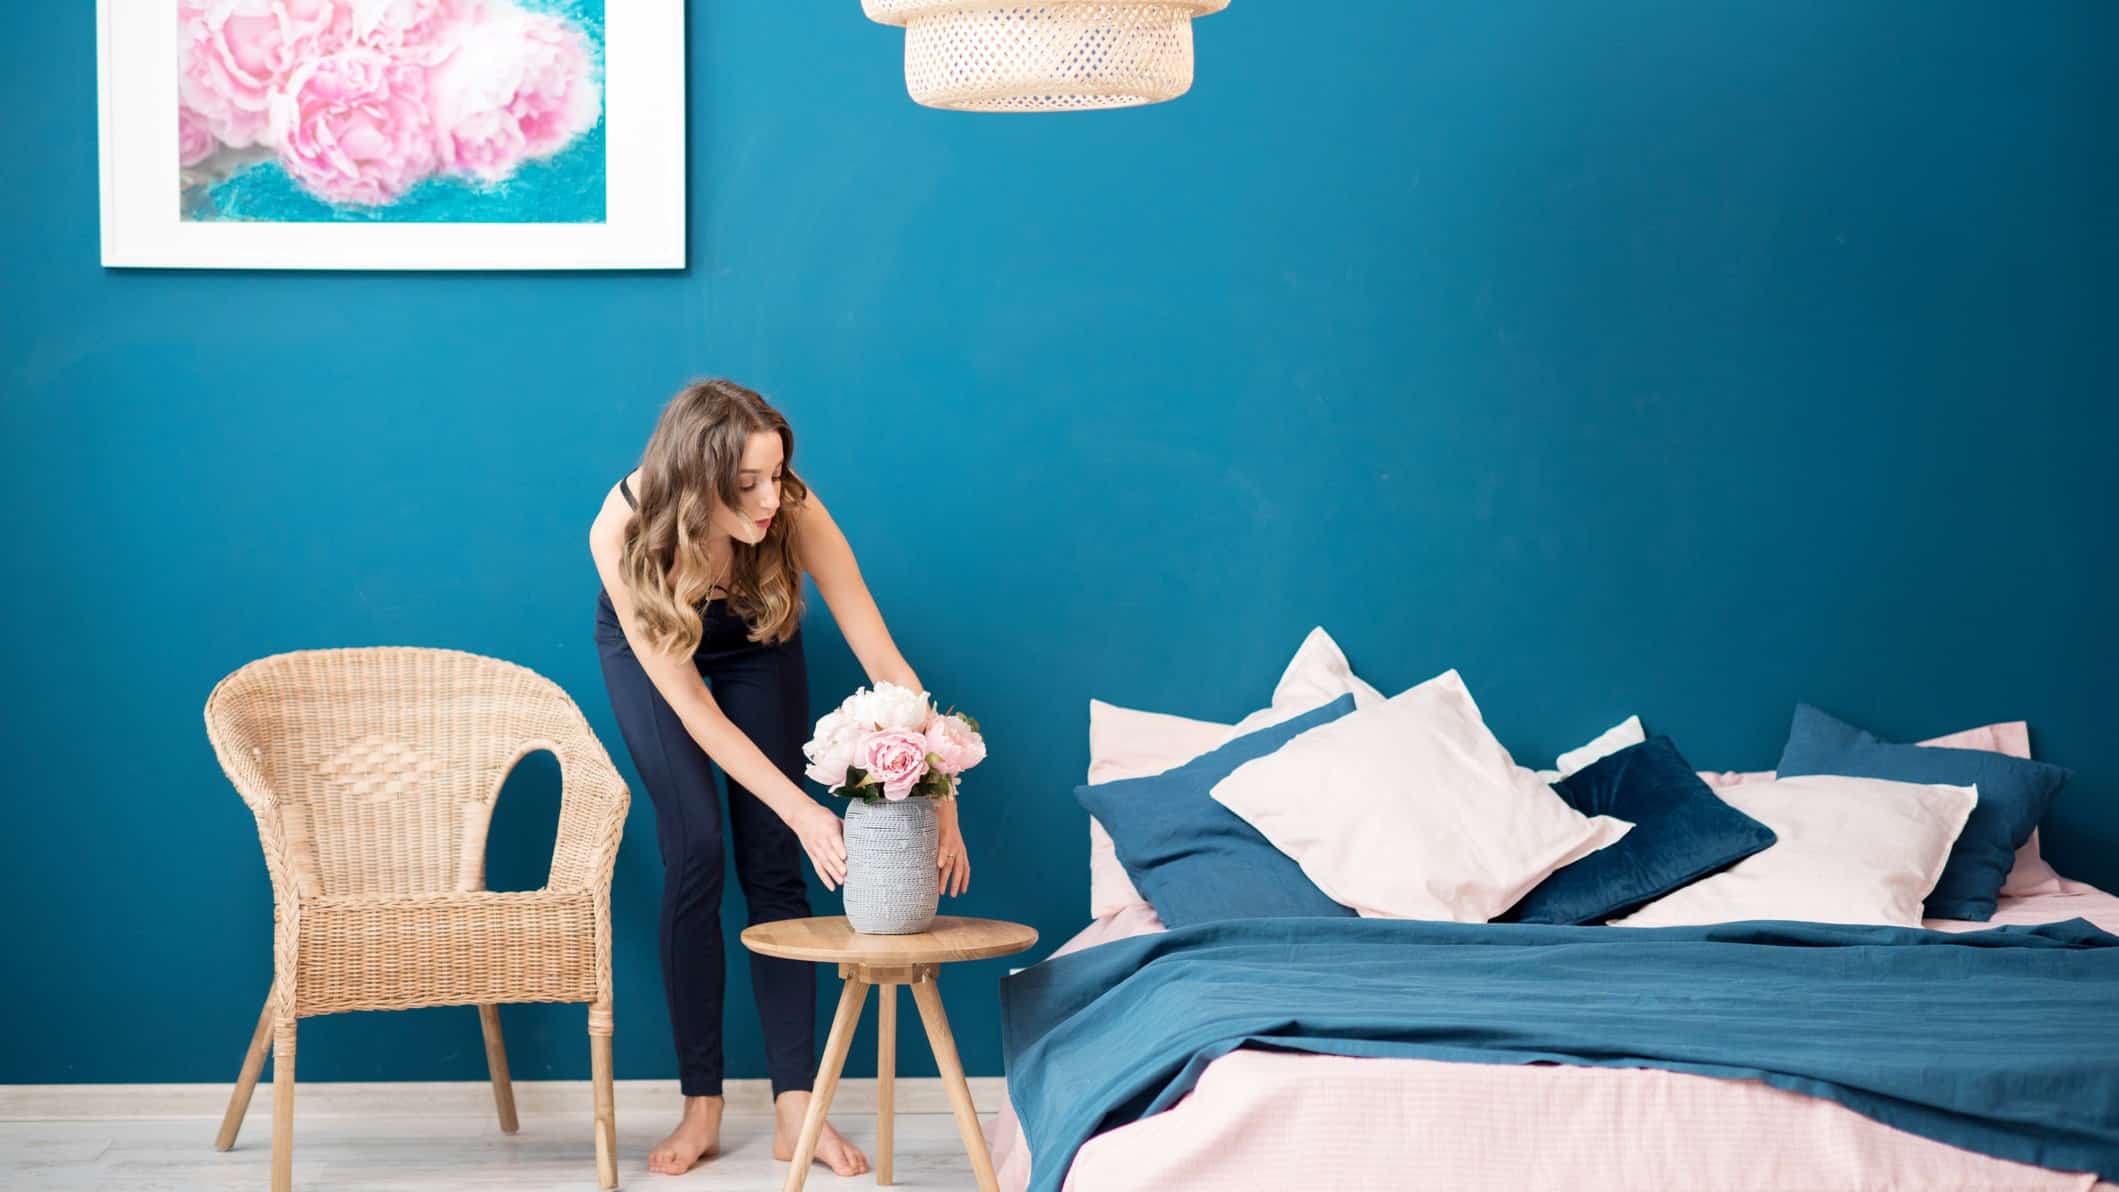 A woman sets flowers on a side table in a beautifully furnished bedroom.